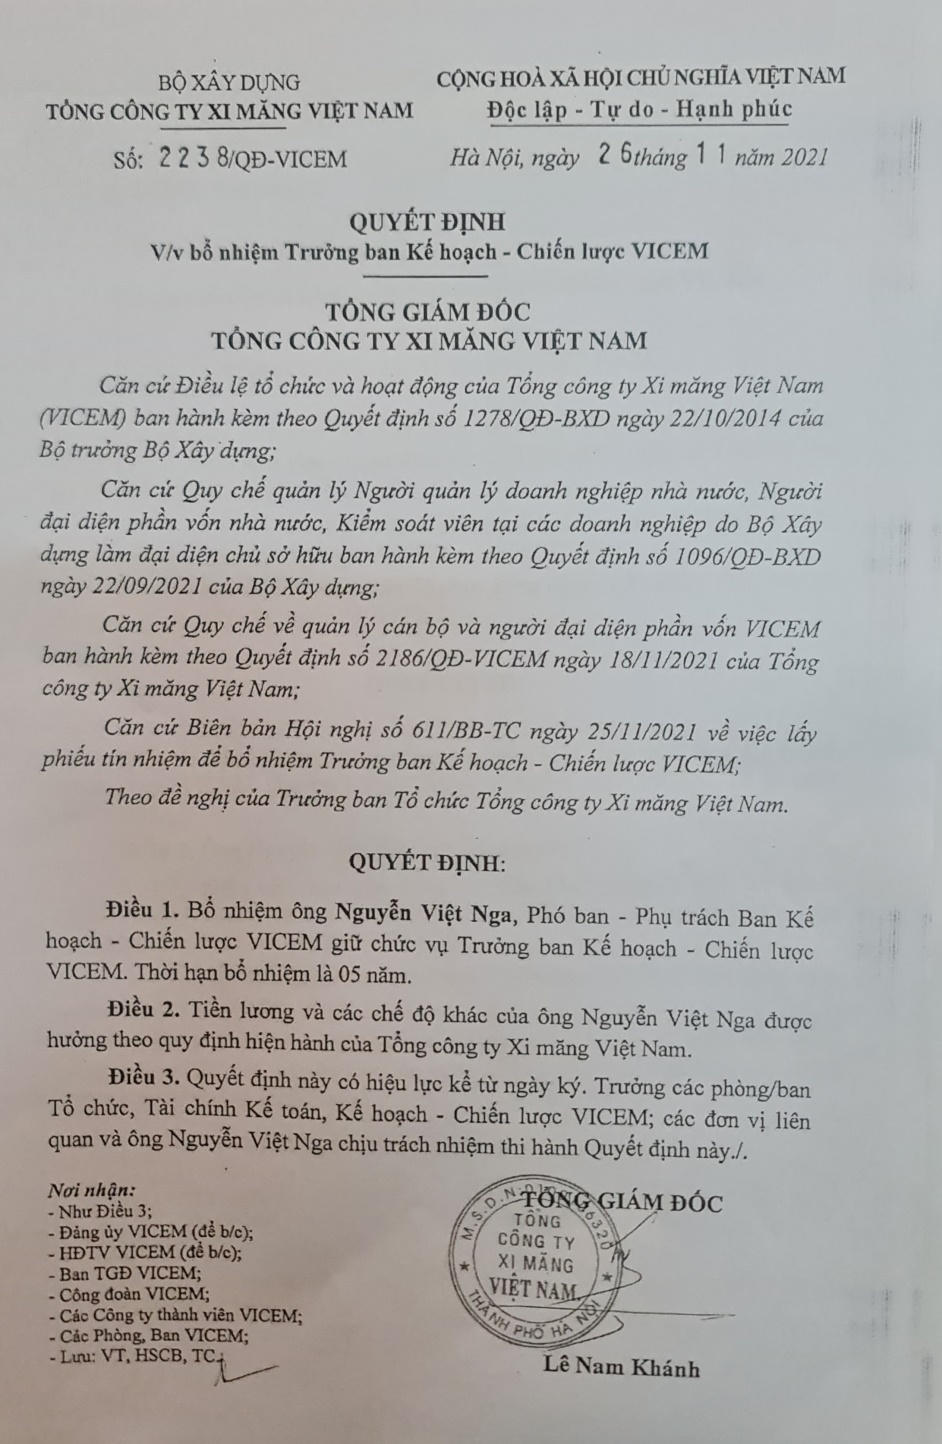 hieu the nao ve viec cong ty co phan med aid cong minh tra lai ca tram ty dong von nha nuoc hinh 2